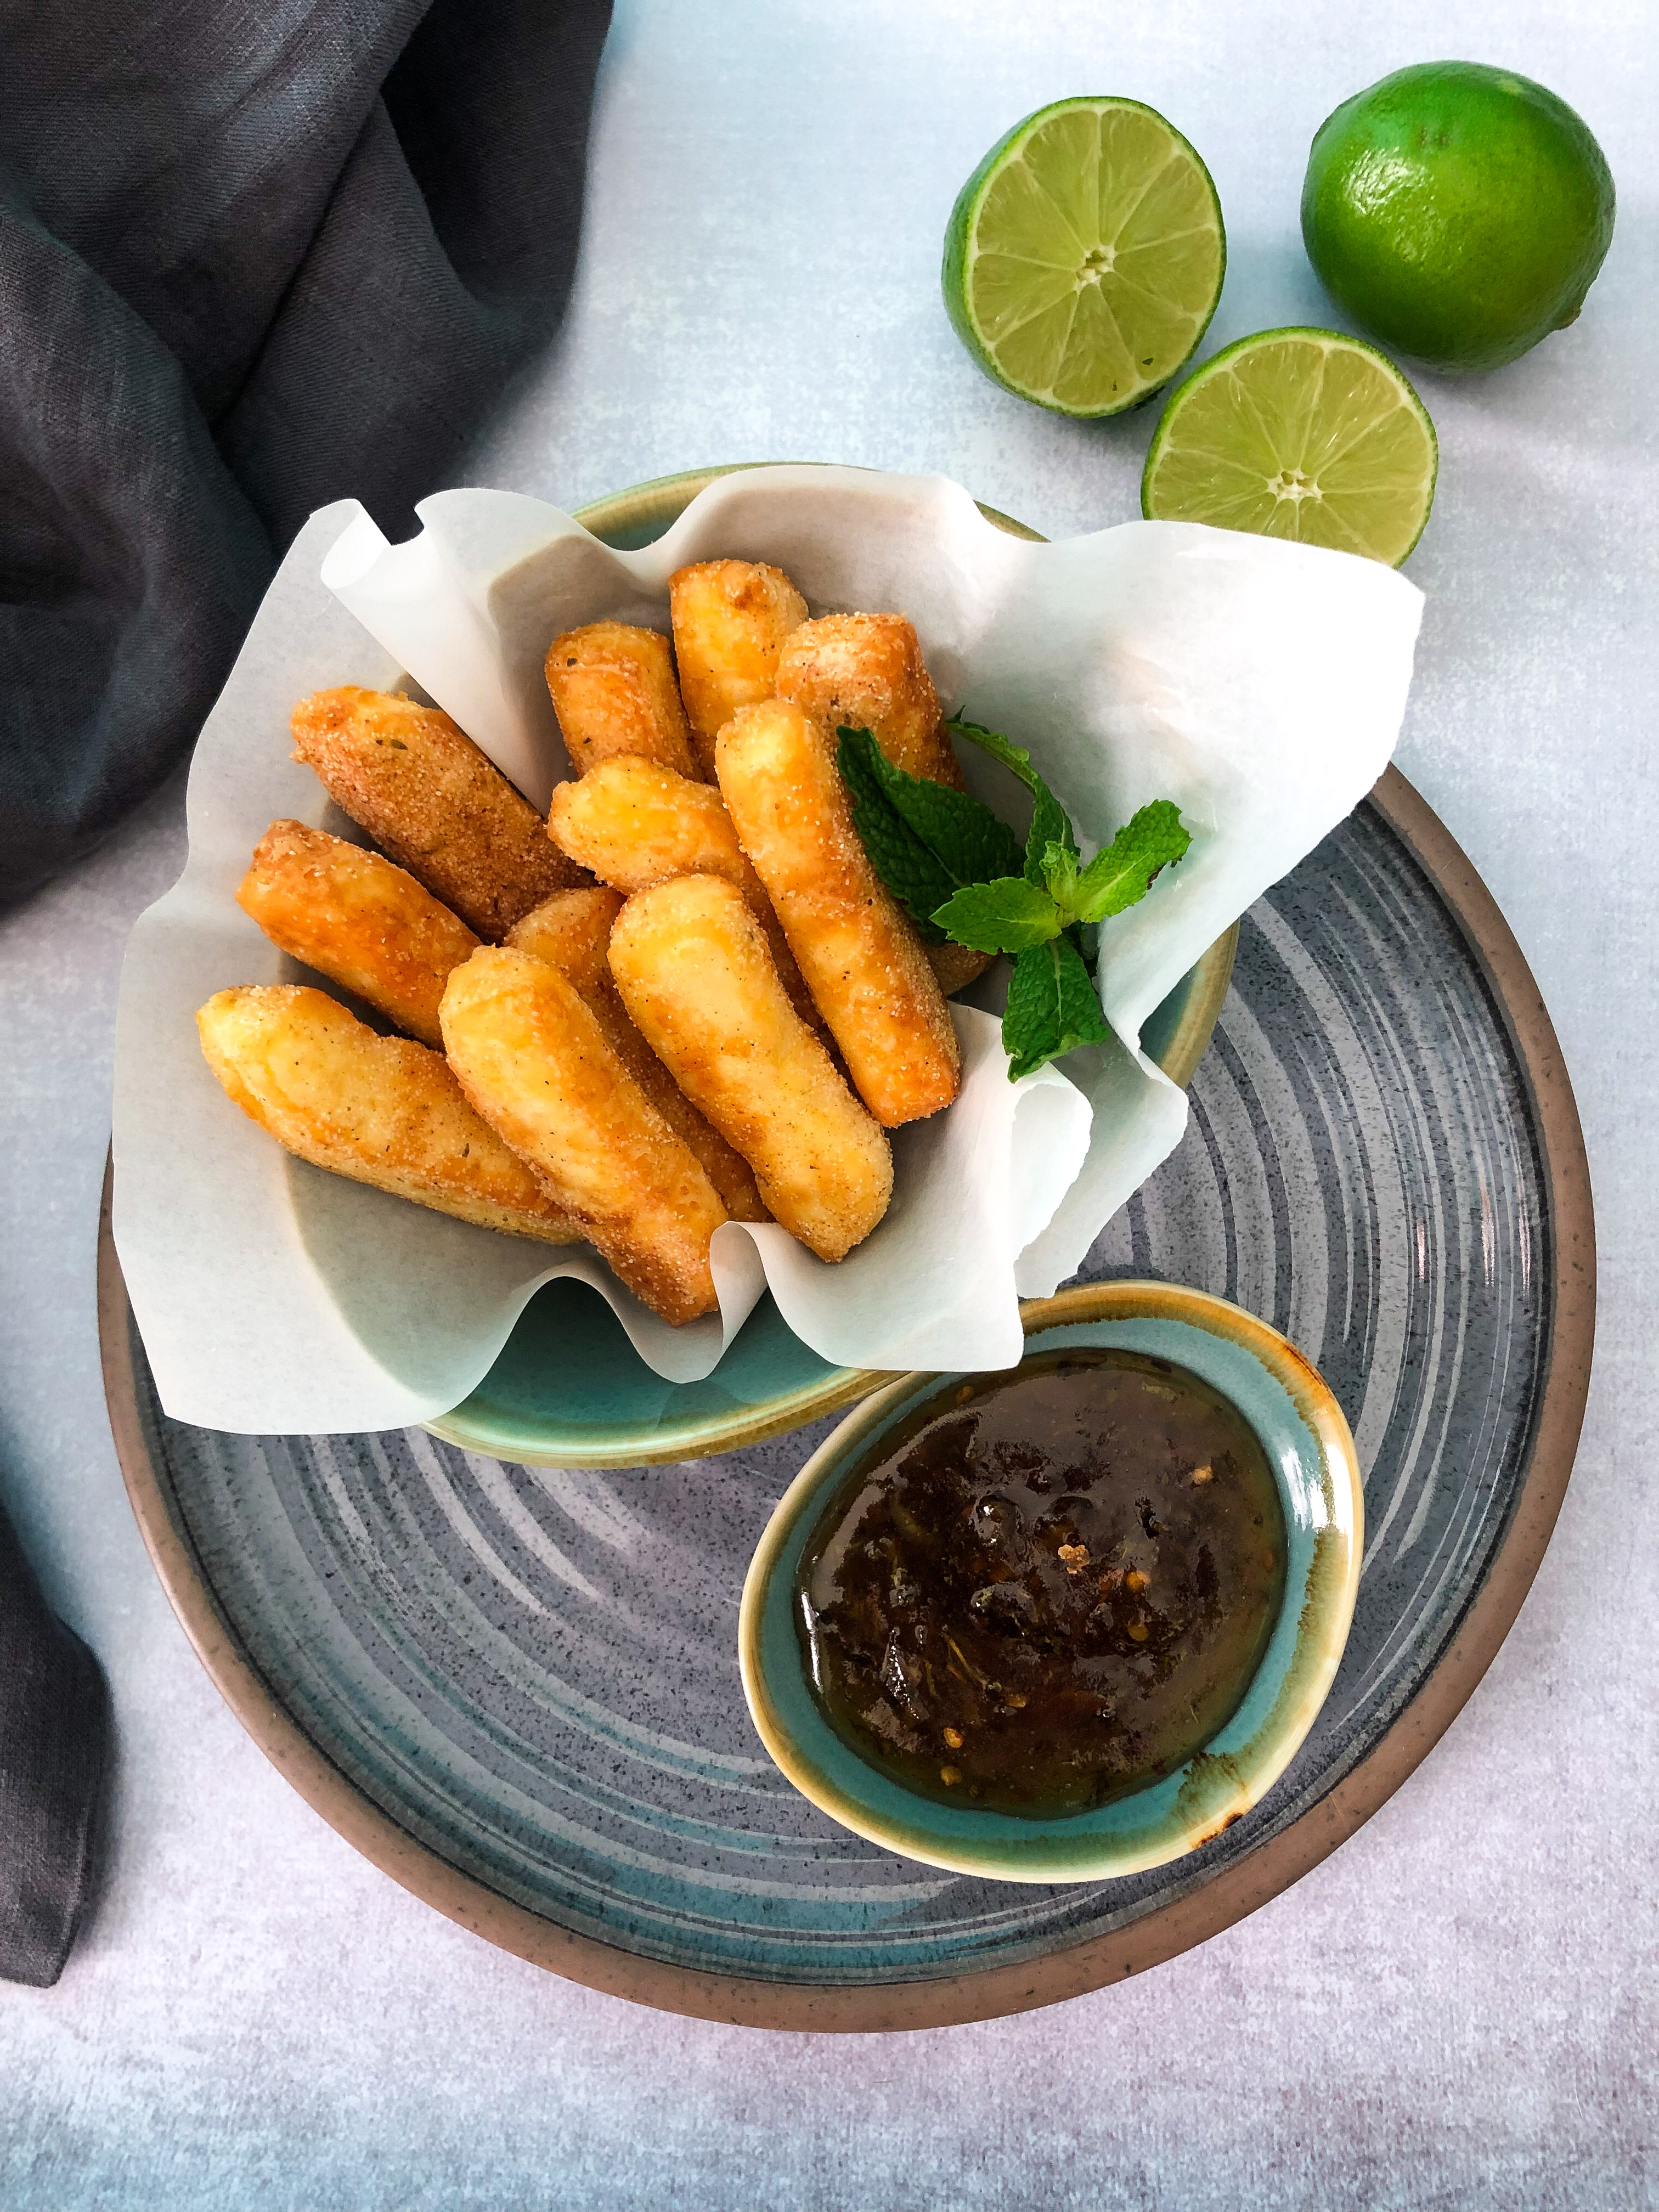 Halloumi fries with a citrus lime mint dipping sauce